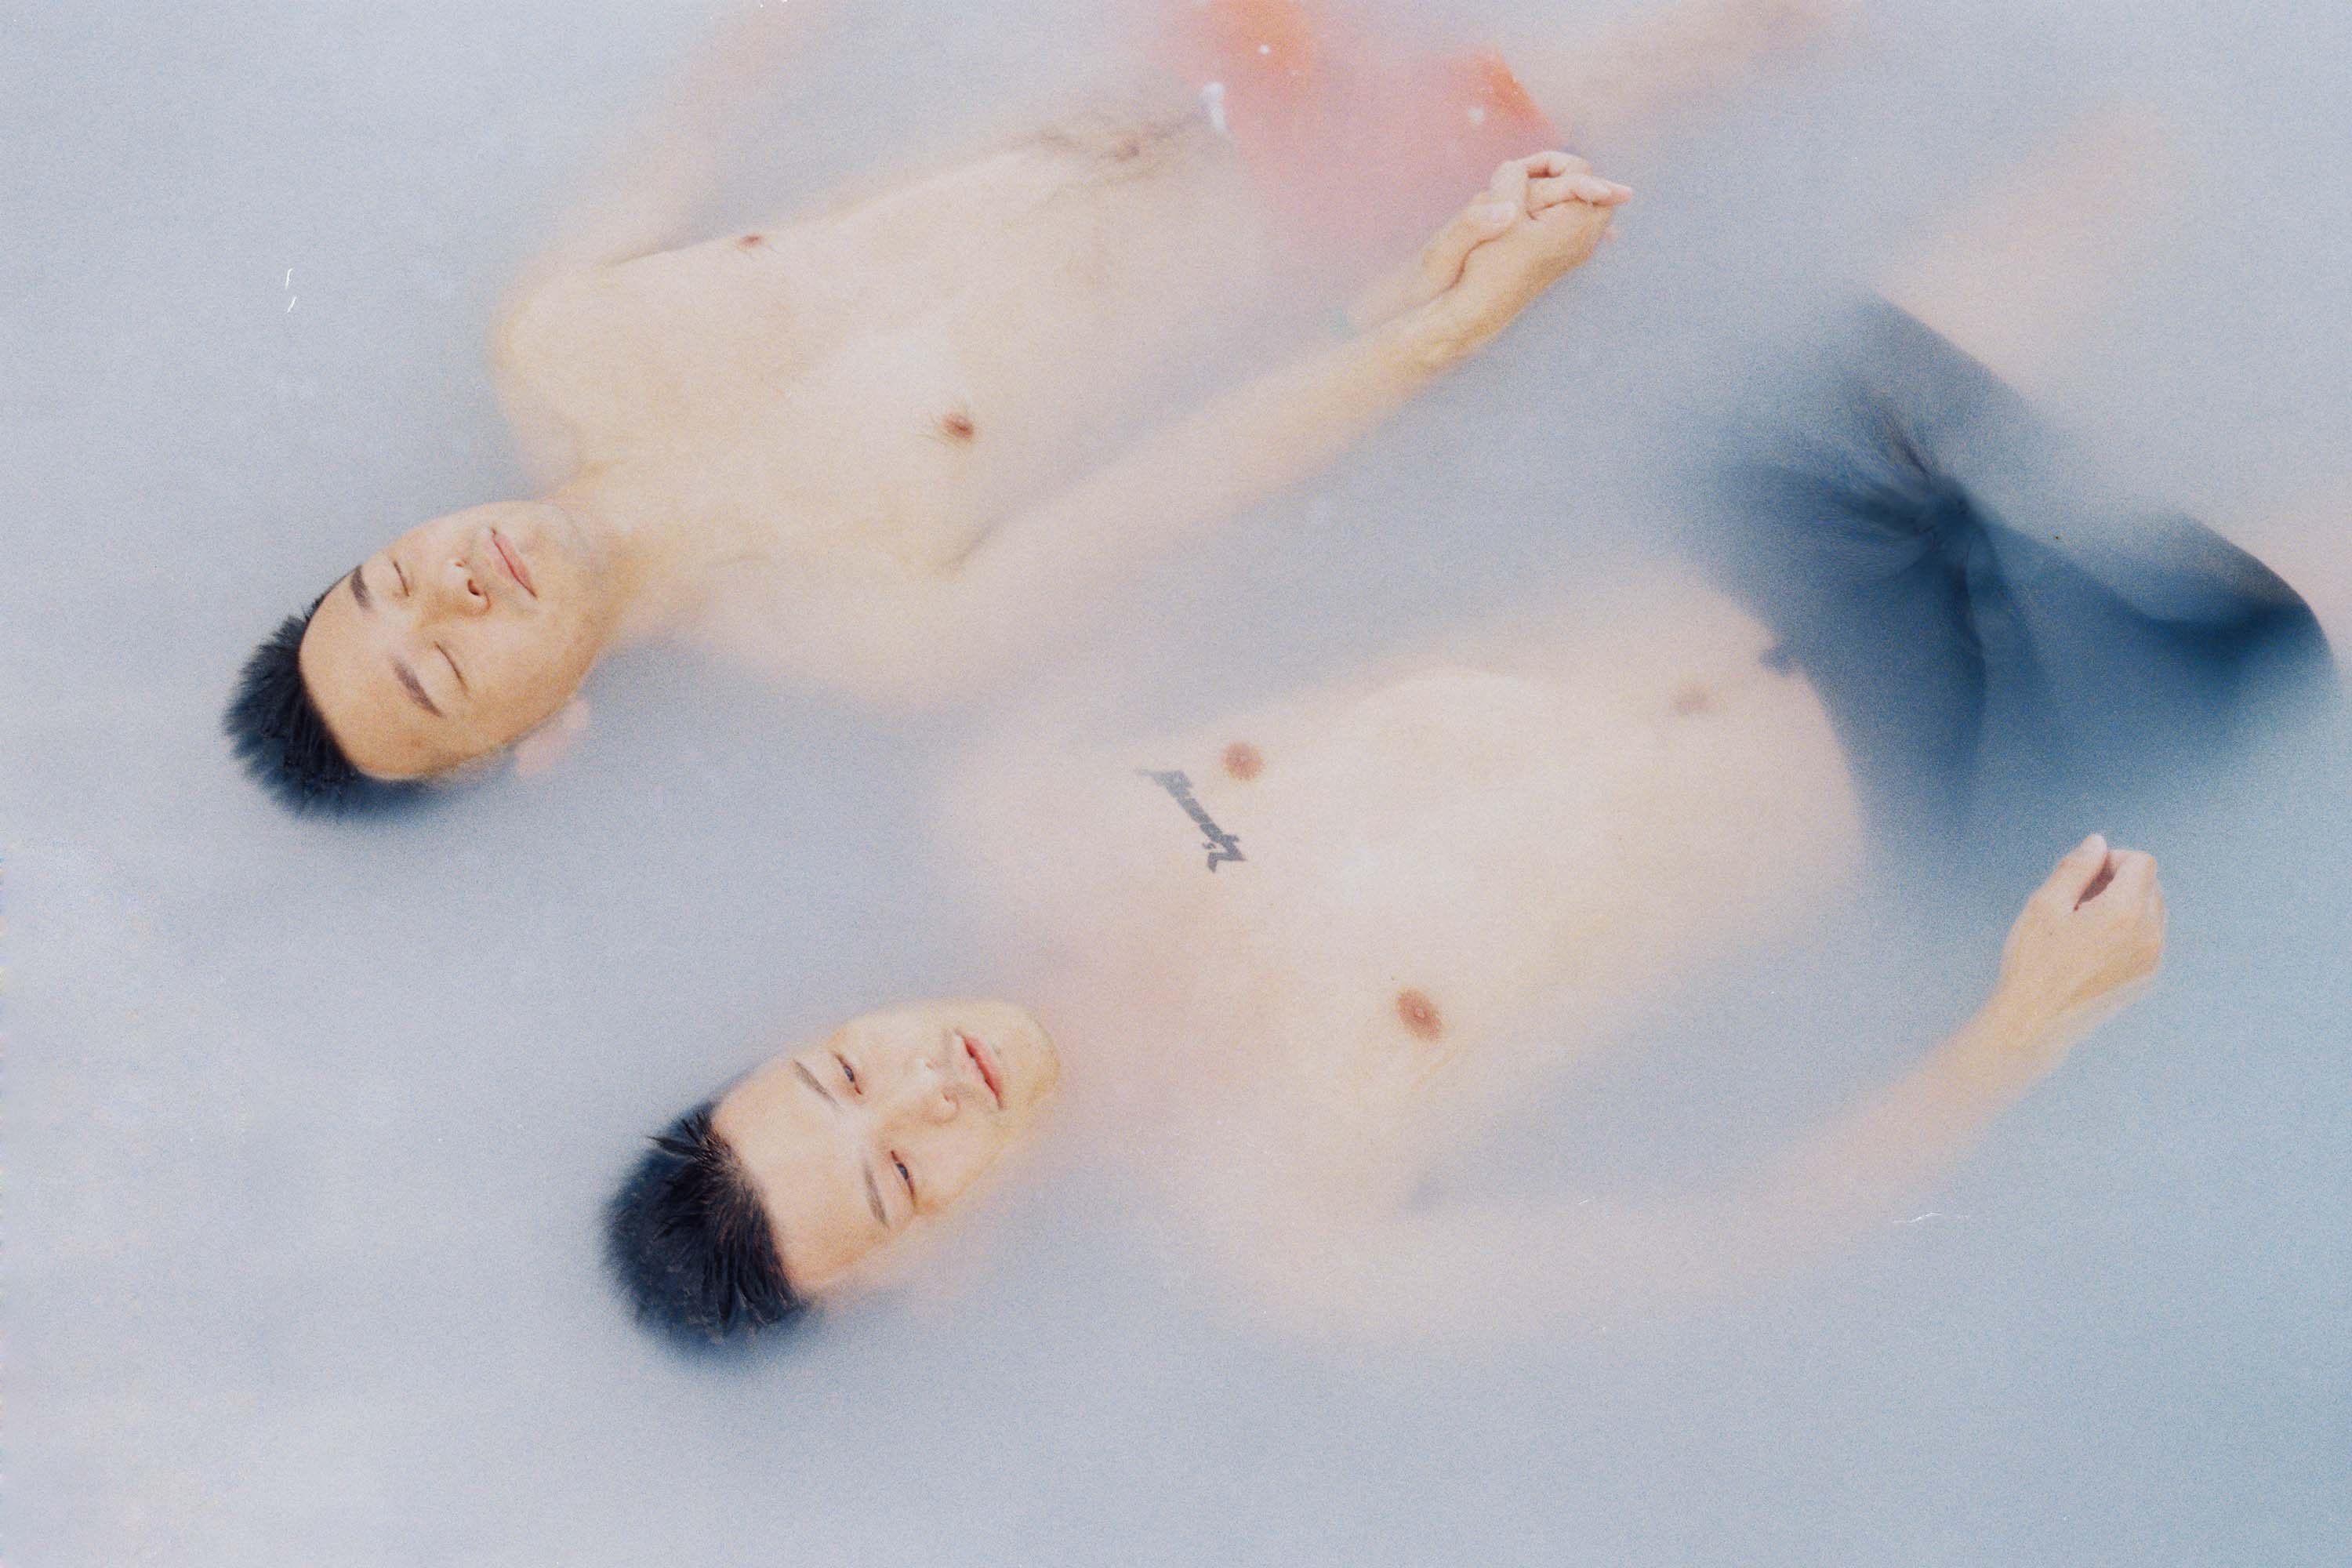 Each, Other | Pixy Liao and Lin Zhipeng (aka No.223)